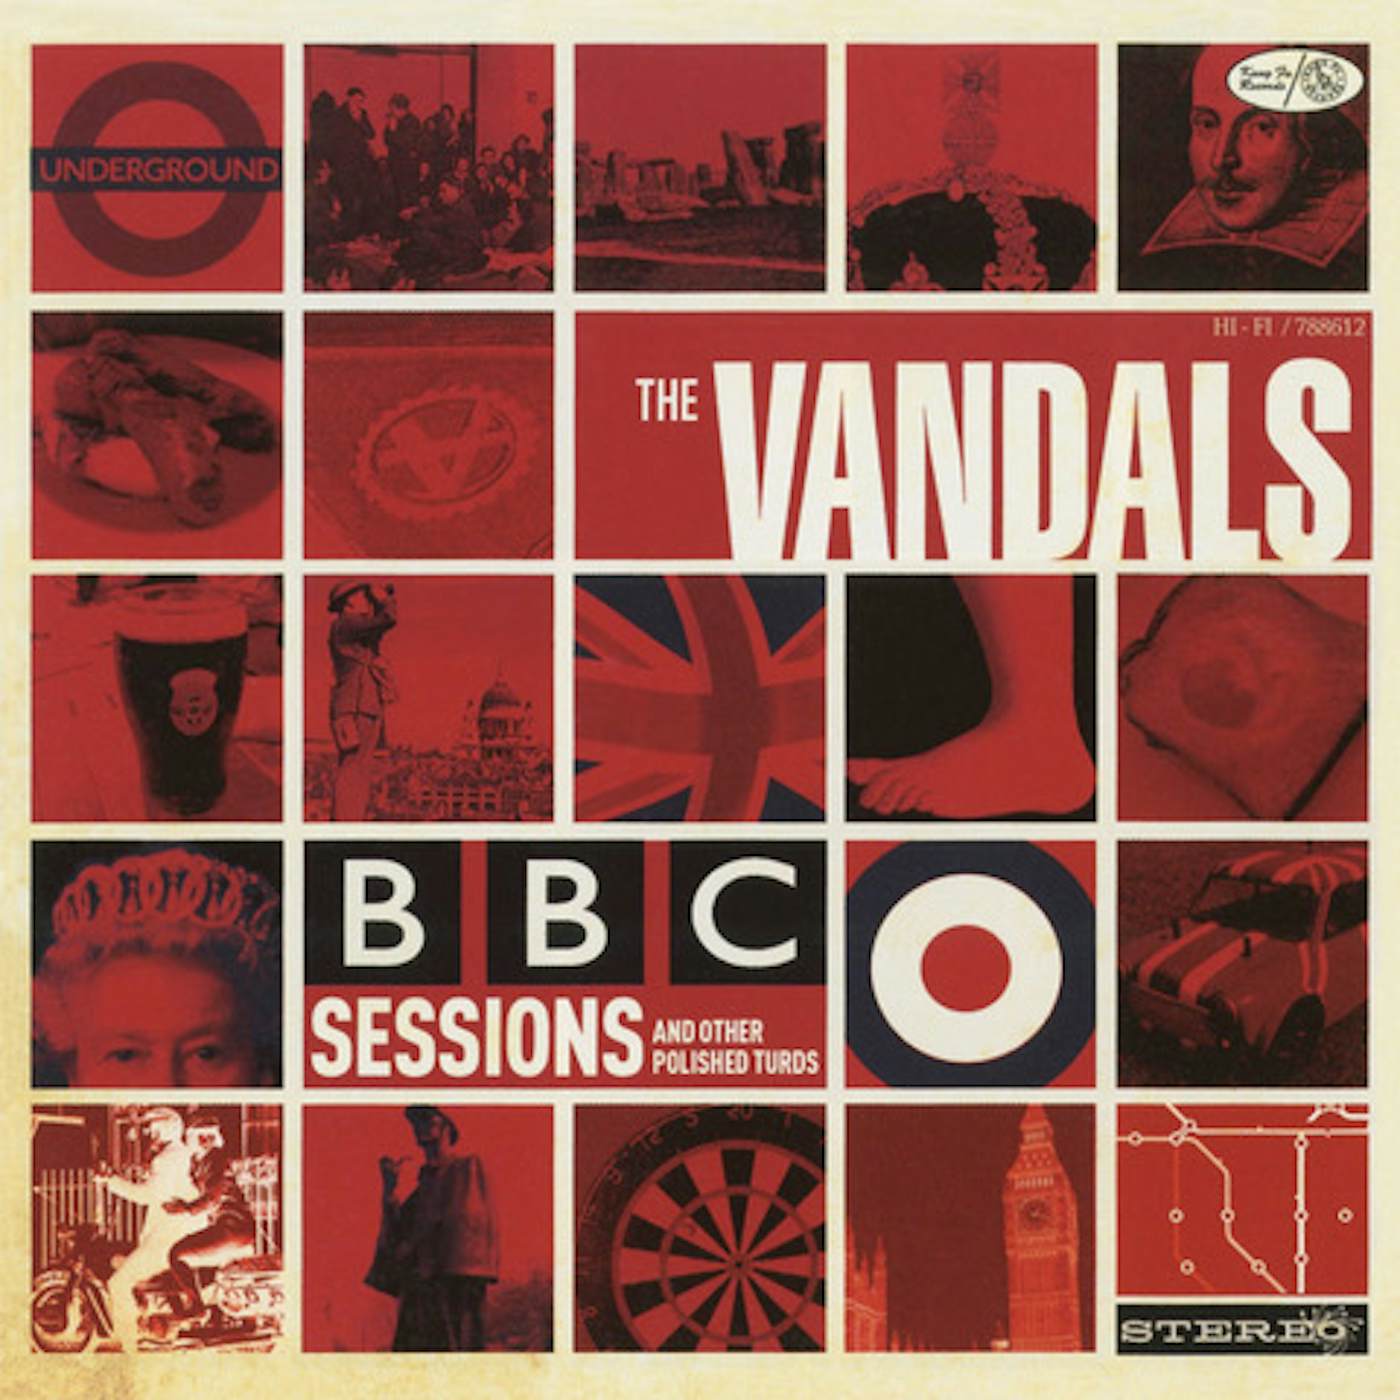 The Vandals  BBC SESSIONS AND OTHER POLISHED TURDS CD